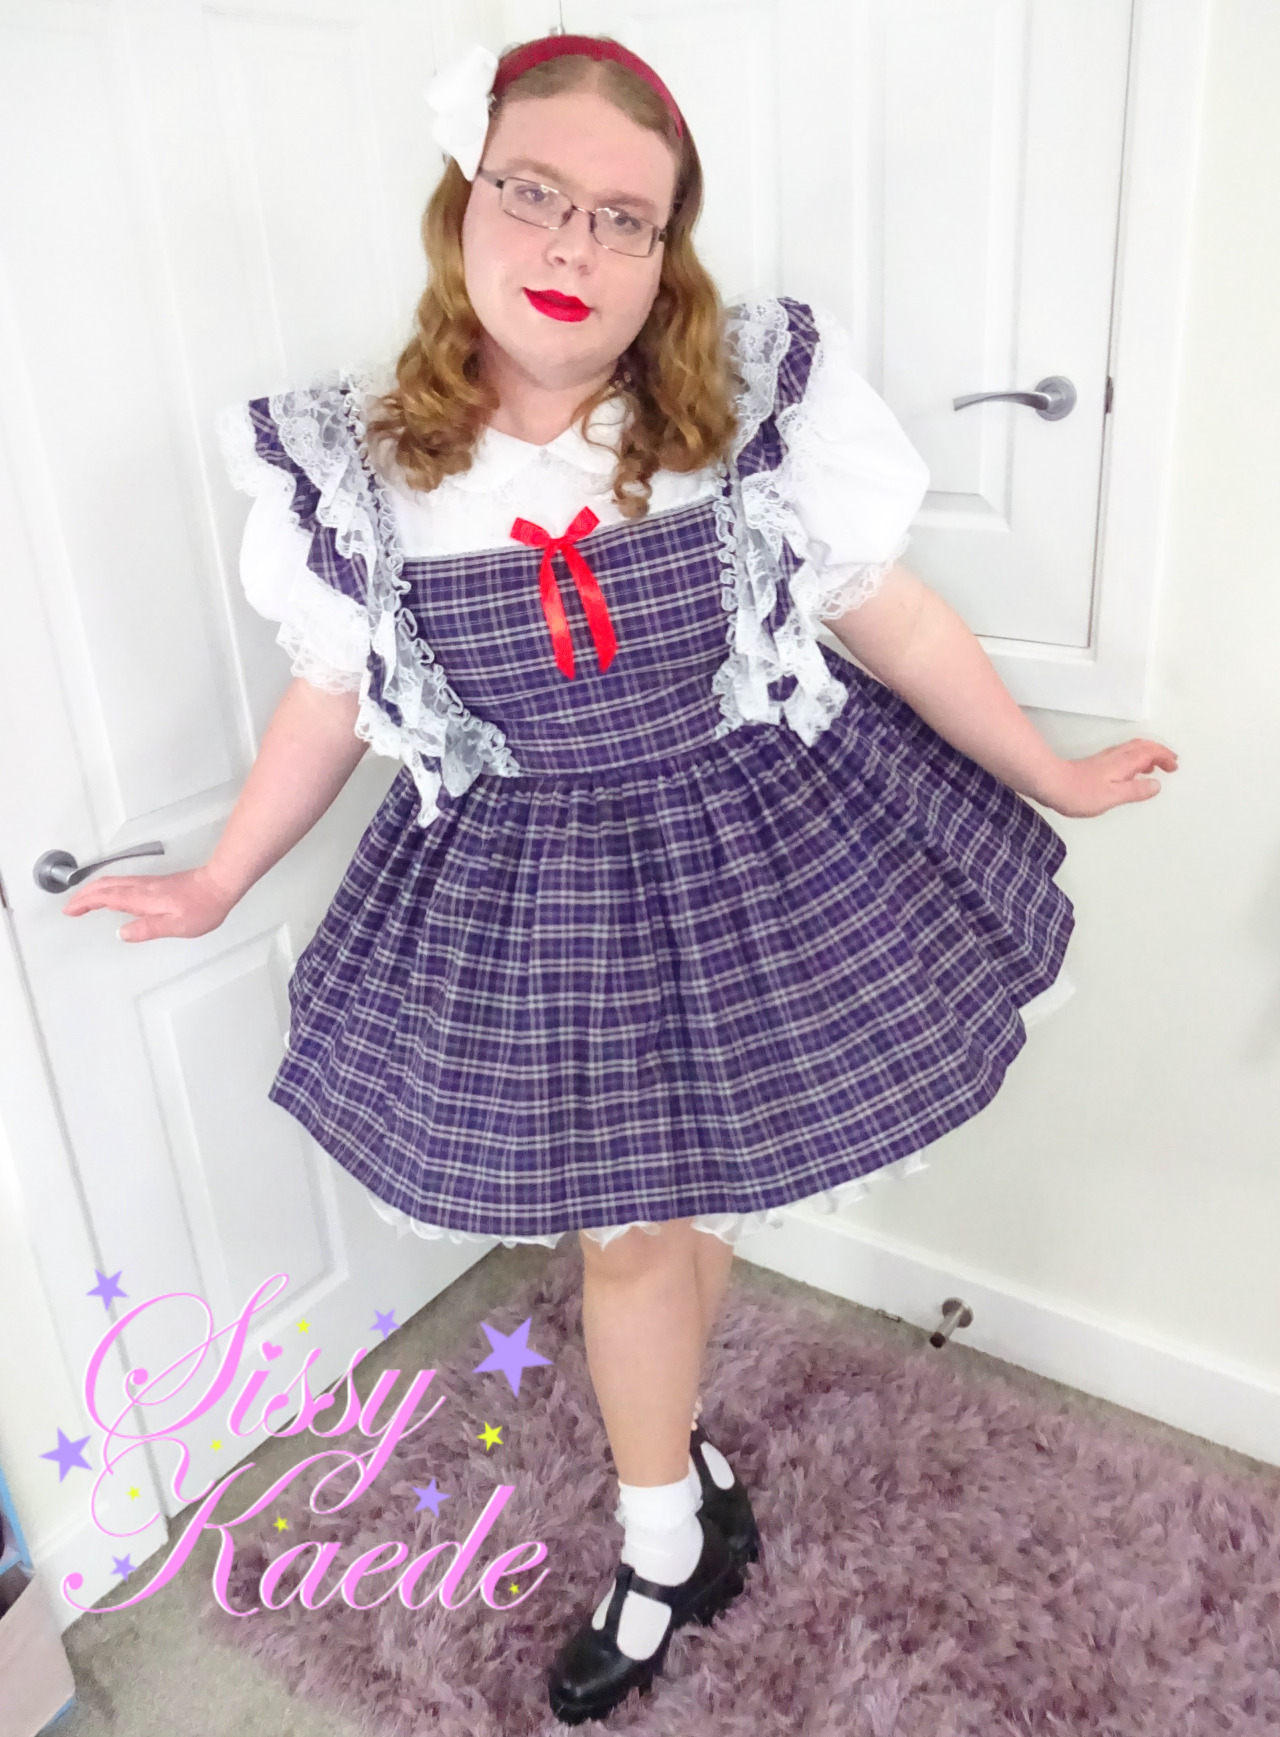 Hi everyone, back in a sissy dress at last. First time since the surgery’s I had to have earlier this year. Finnaly felt confortable enough to sissy up, cant keep me from frillys for too long hehe. #sissy sissygirl prissysissy prissy frillysissy sissydress sissyschoolgirl